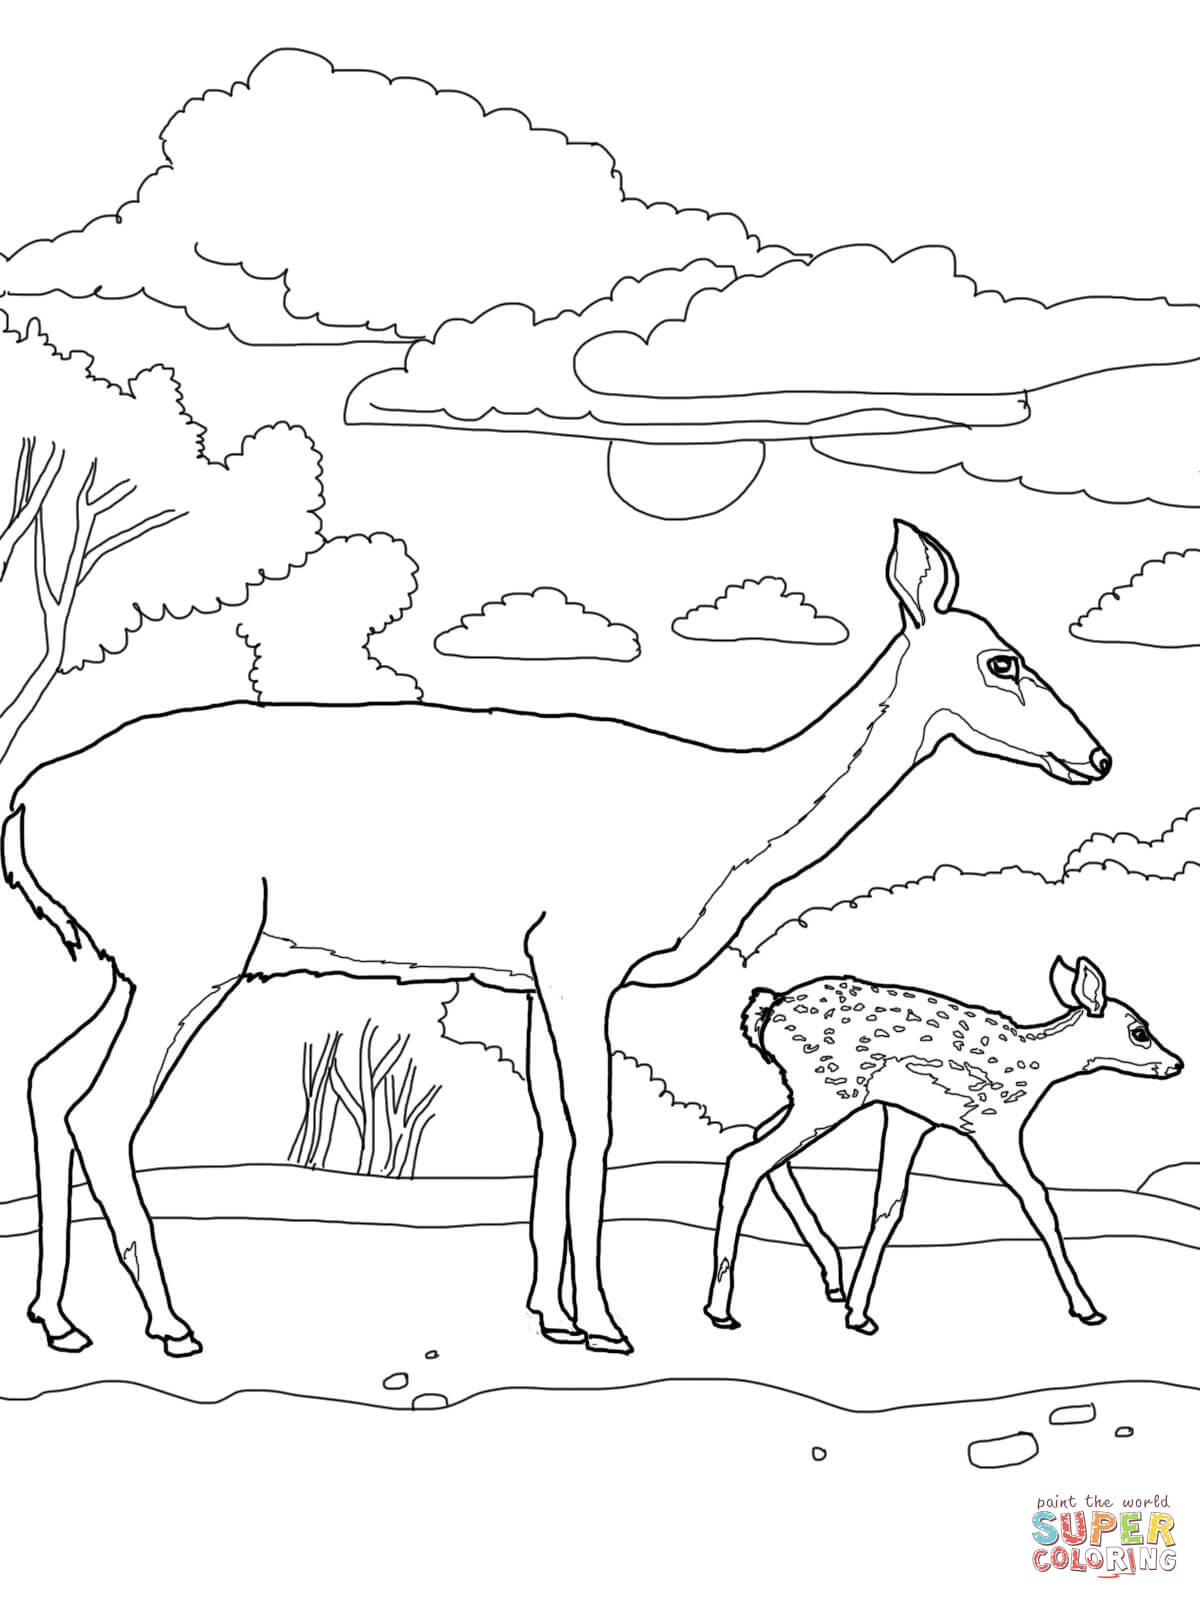 White-tailed Deer coloring #13, Download drawings